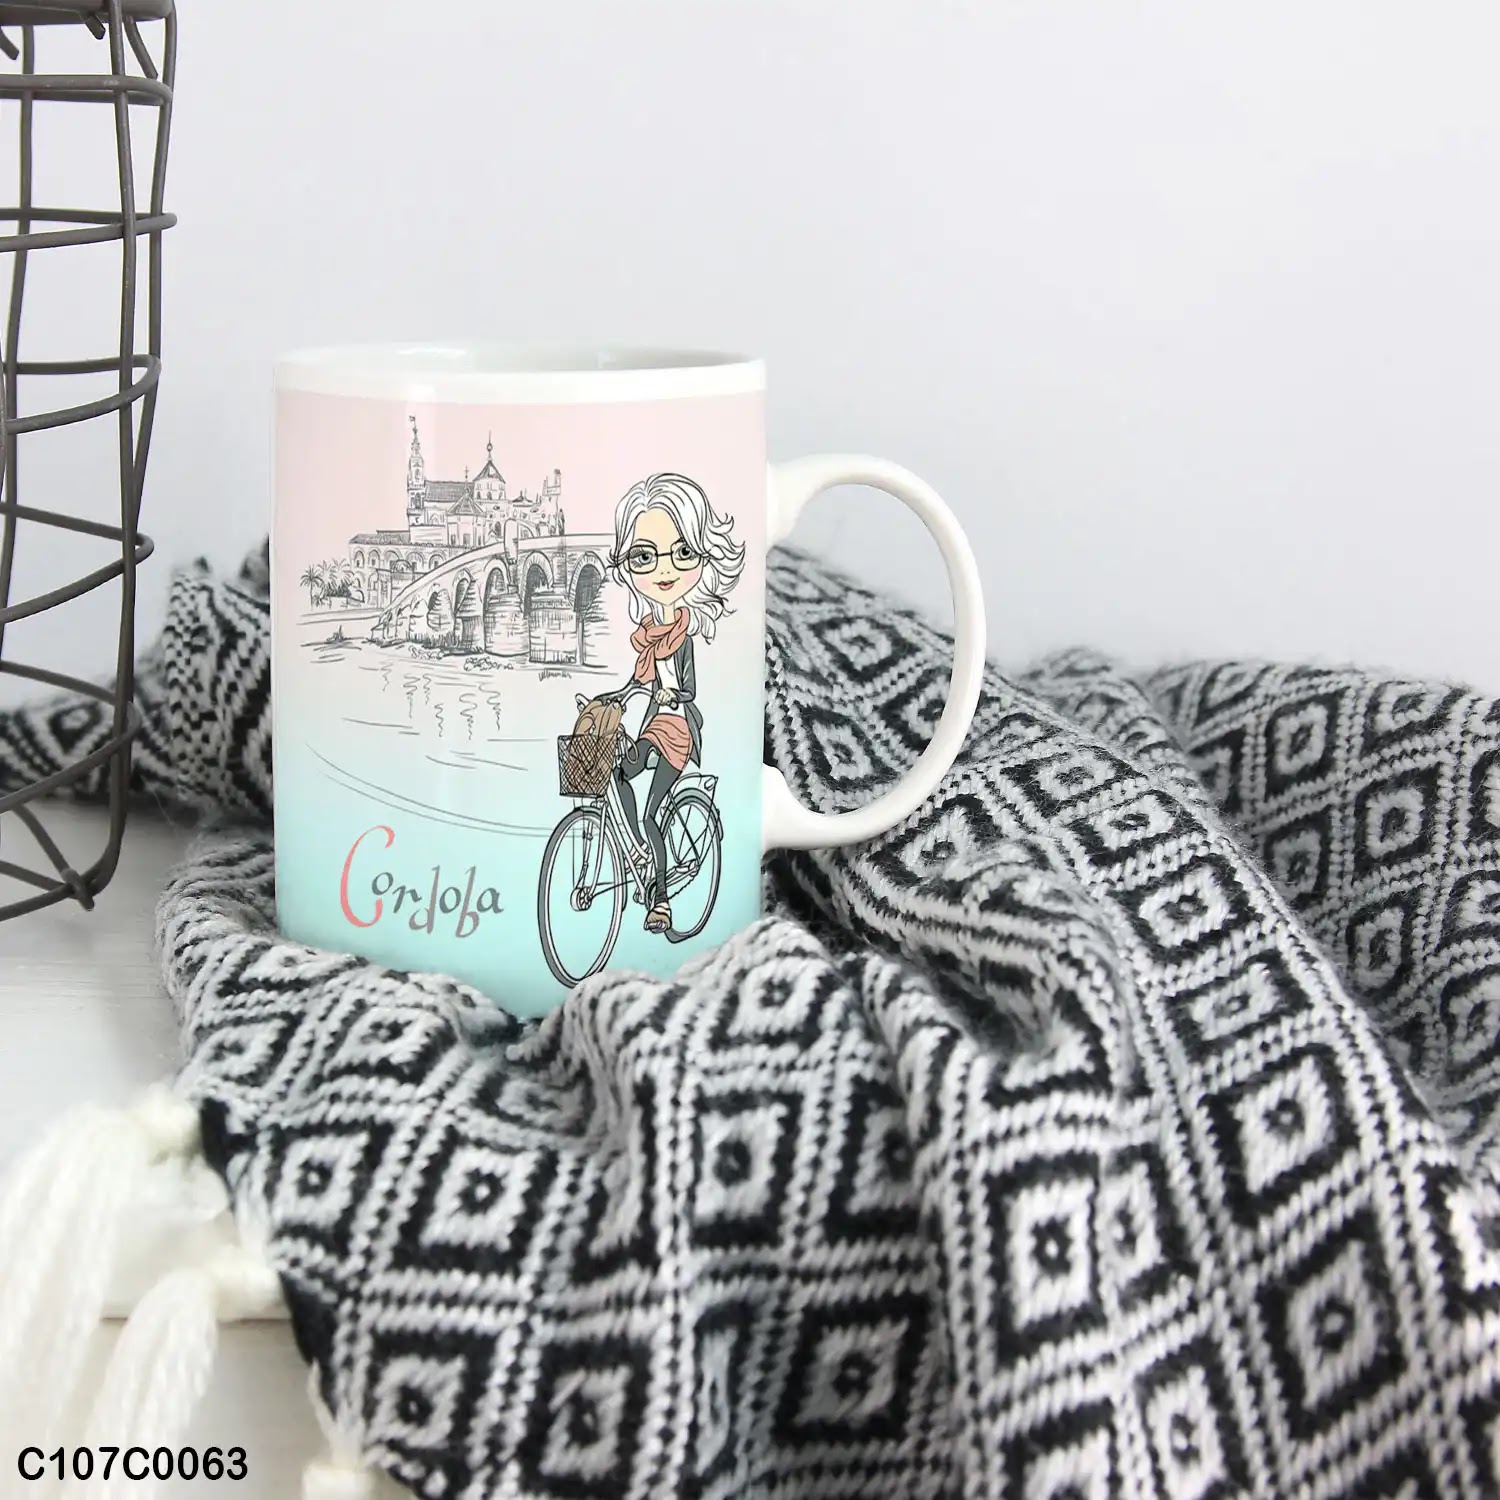 A mug (cup) printed with an image of a girl riding a bike